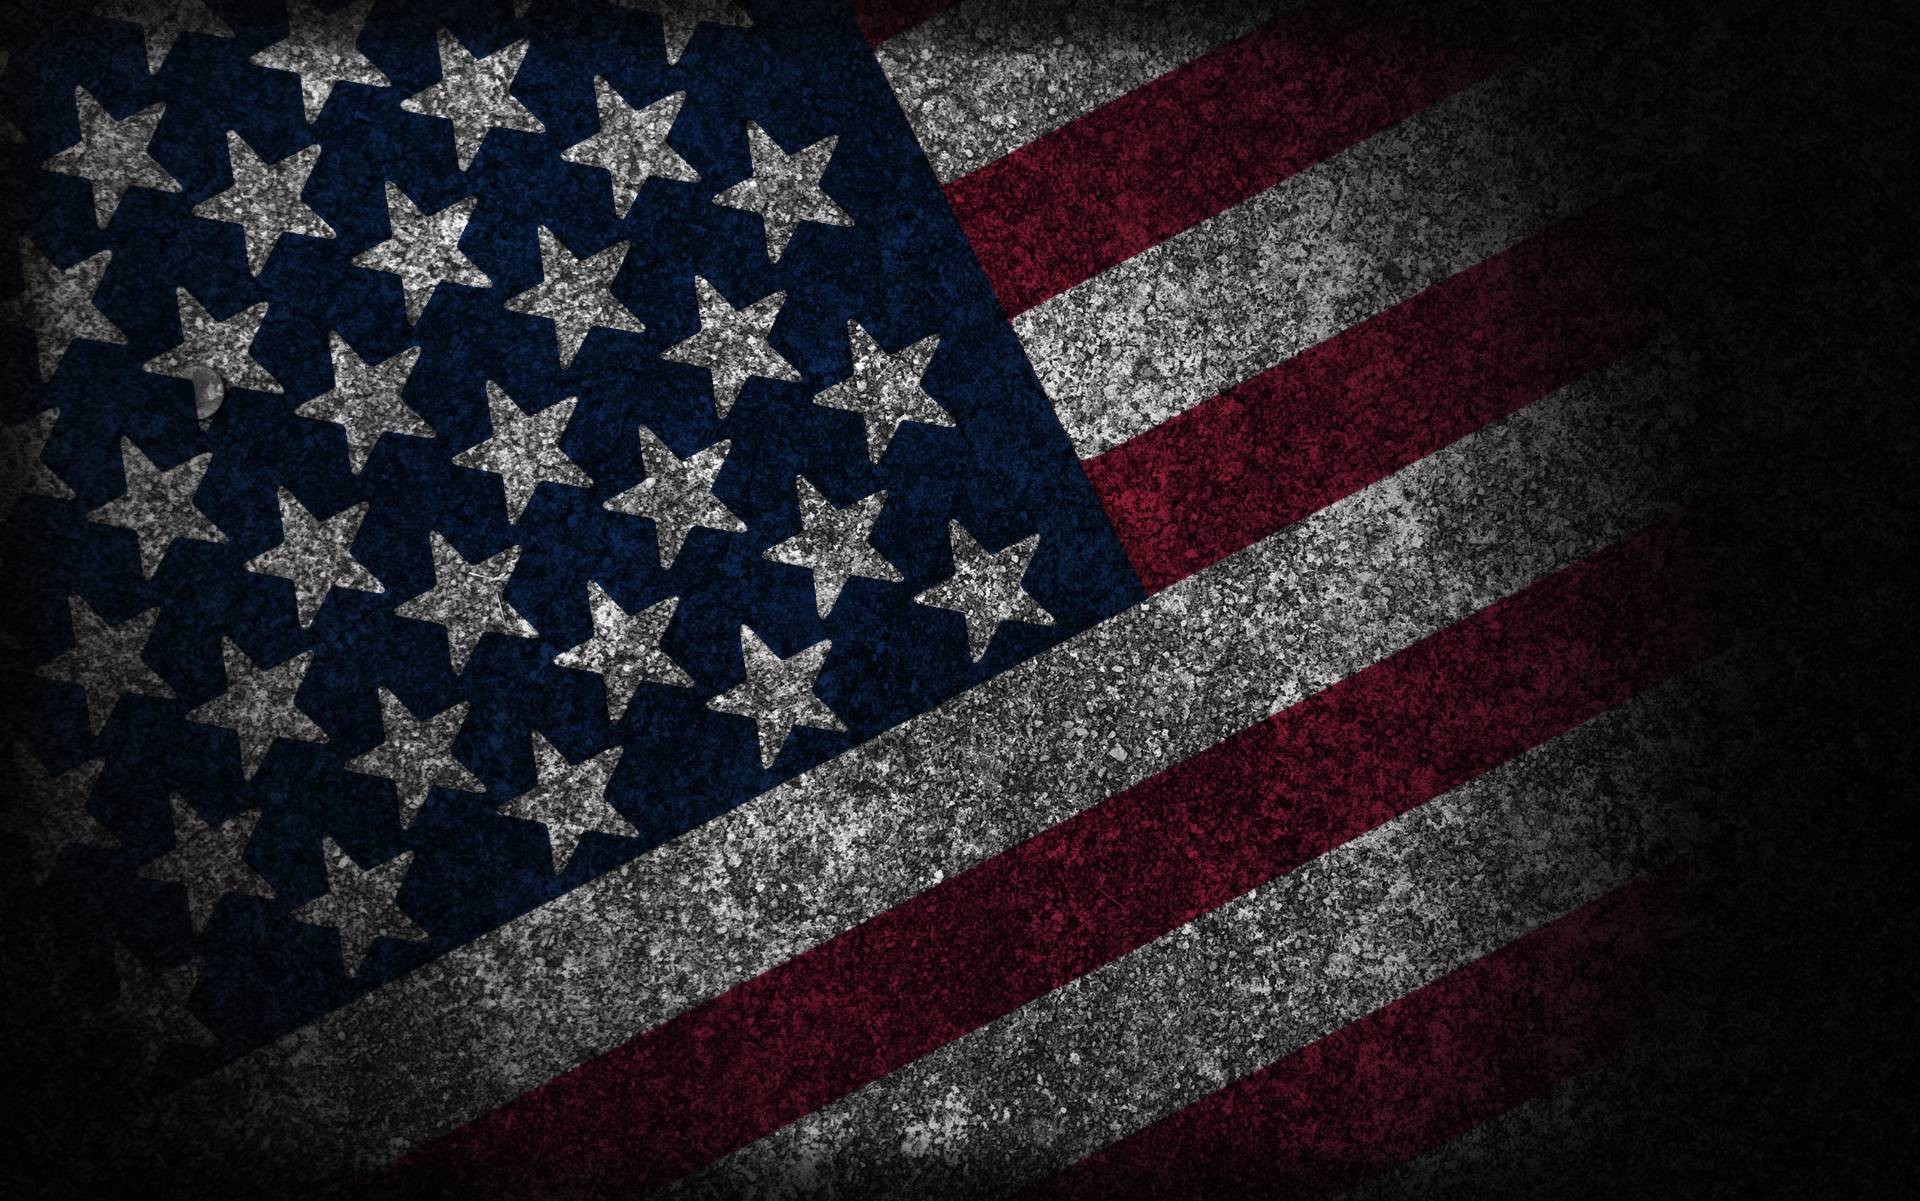 American Flag Wallpaper 1920×1200 by hassified on DeviantArt